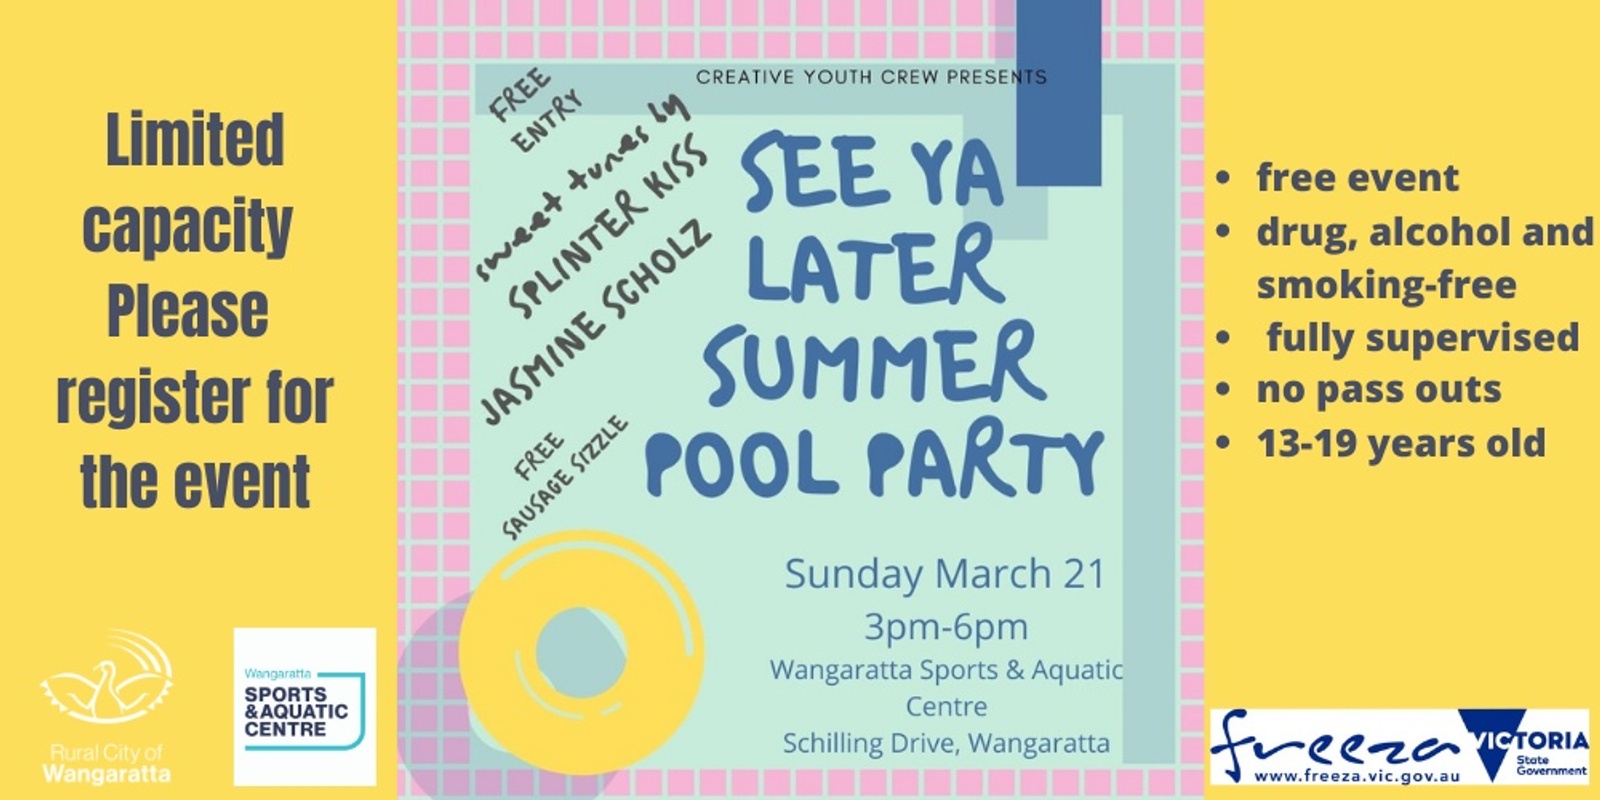 Banner image for See Ya Later Summer Pool Party